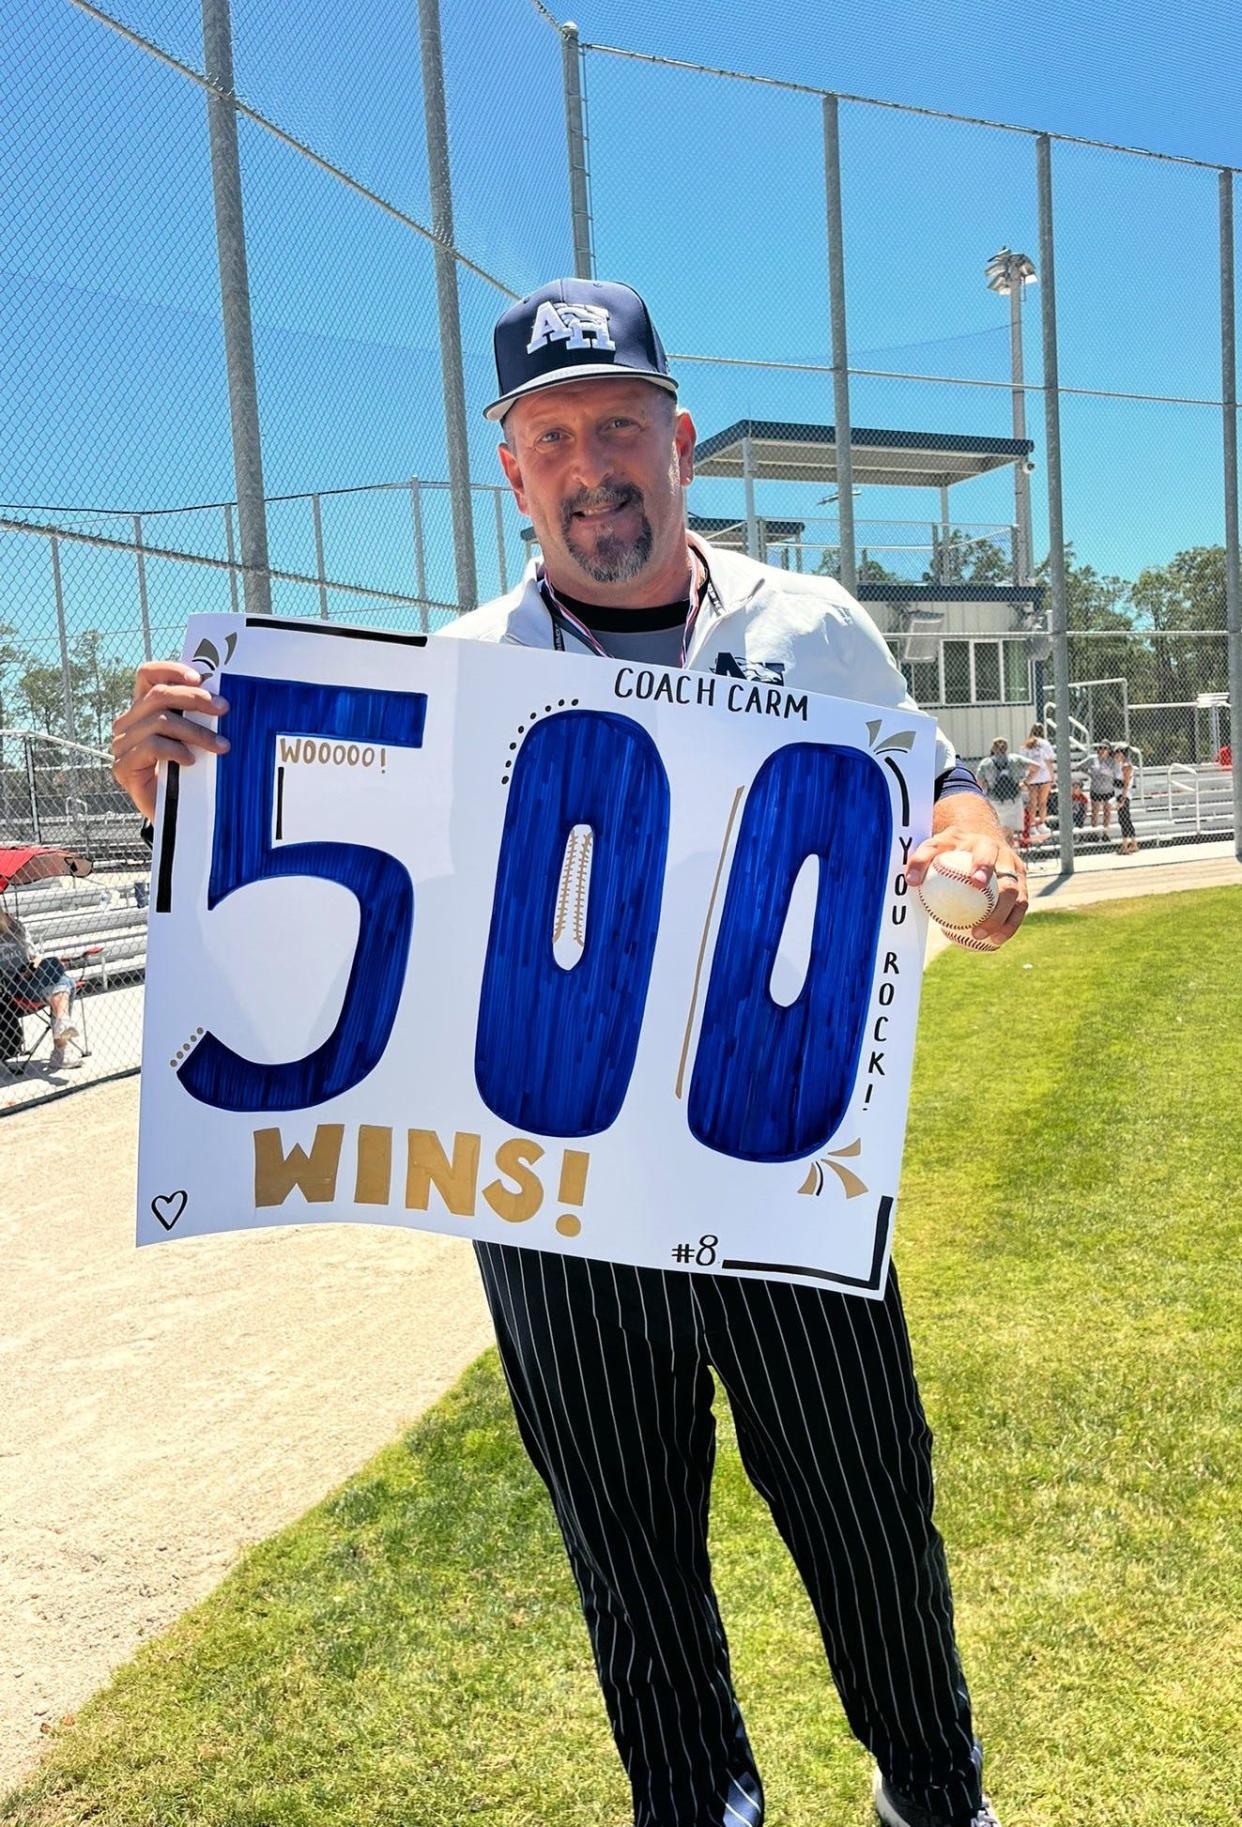 American Heritage-Delray coach Carm Mazza won his 500th career game on April 13 when the Stallions beat Naples-Aubrey Rogers.